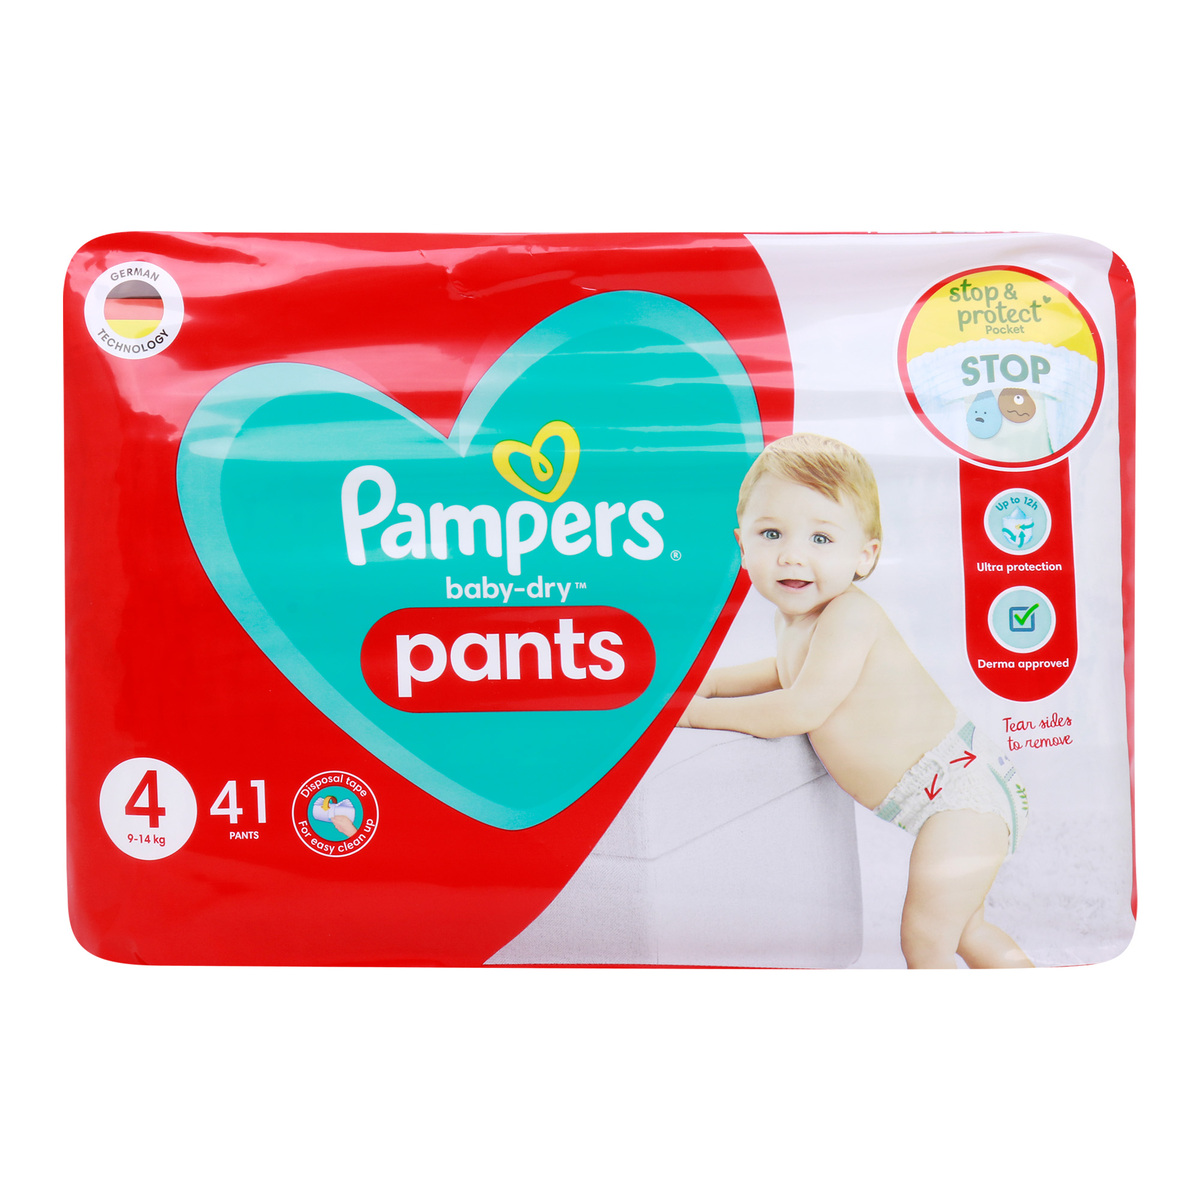 Pampers Baby-Dry Nappy Pants Diaper Size 4 9-15 kg 41 pcs